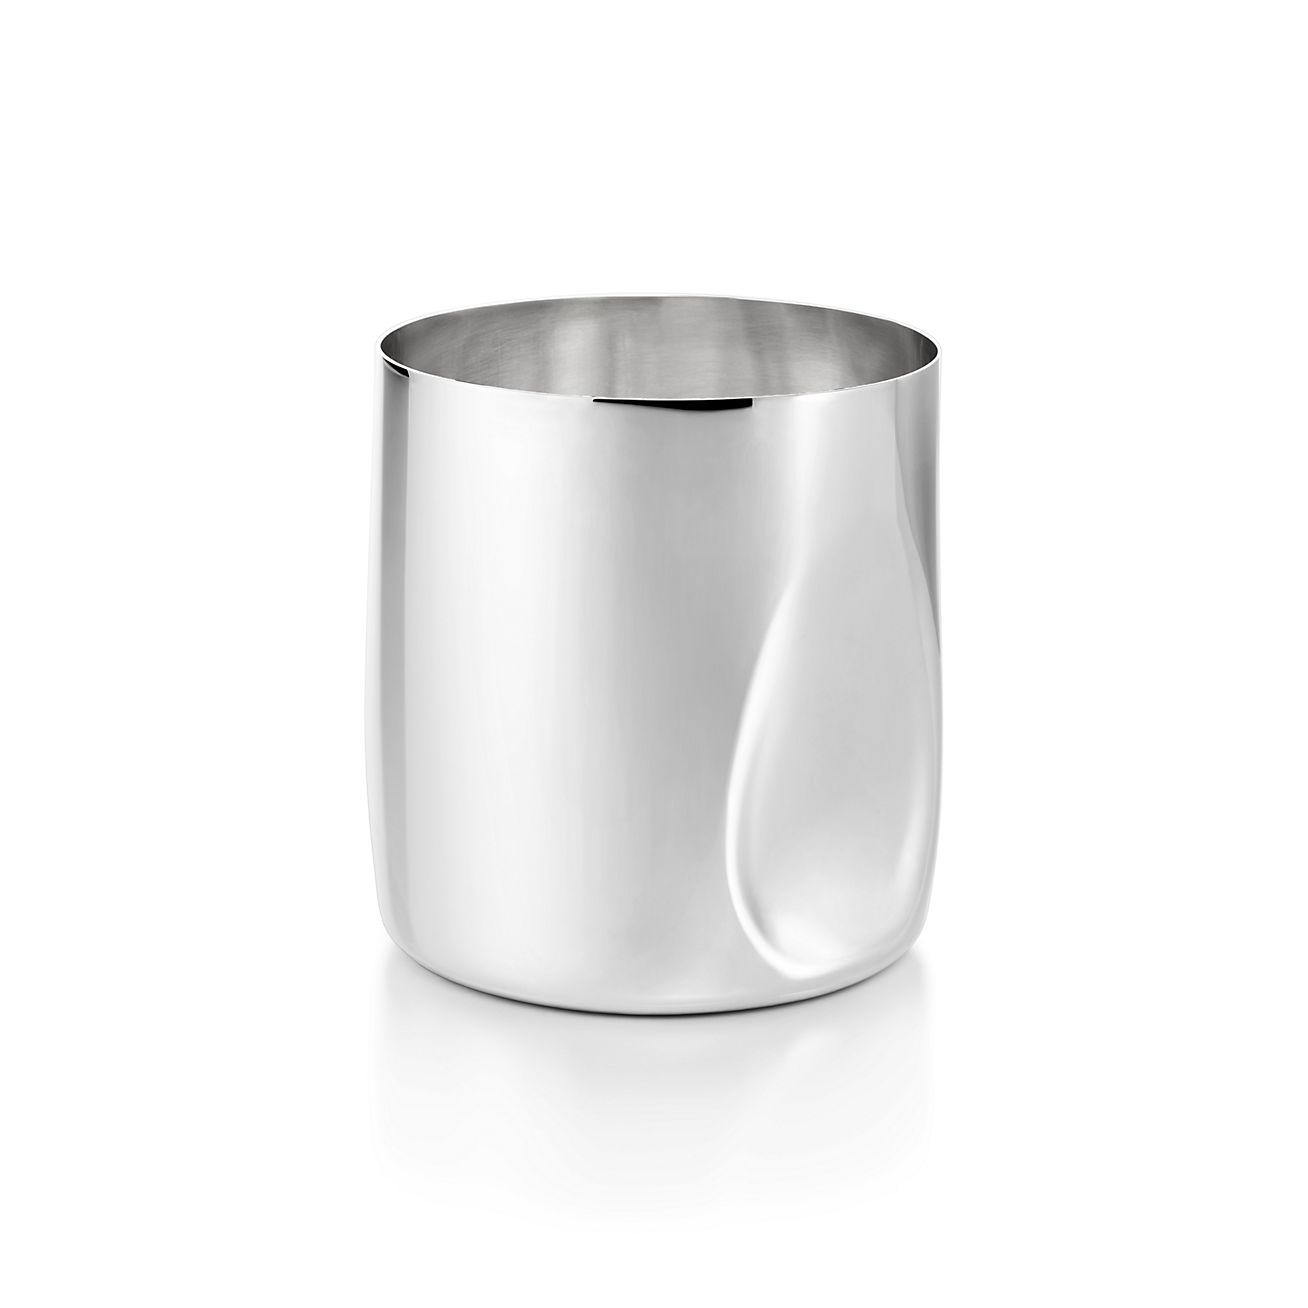 Elsa Peretti® Thumbprint water cup in sterling silver.